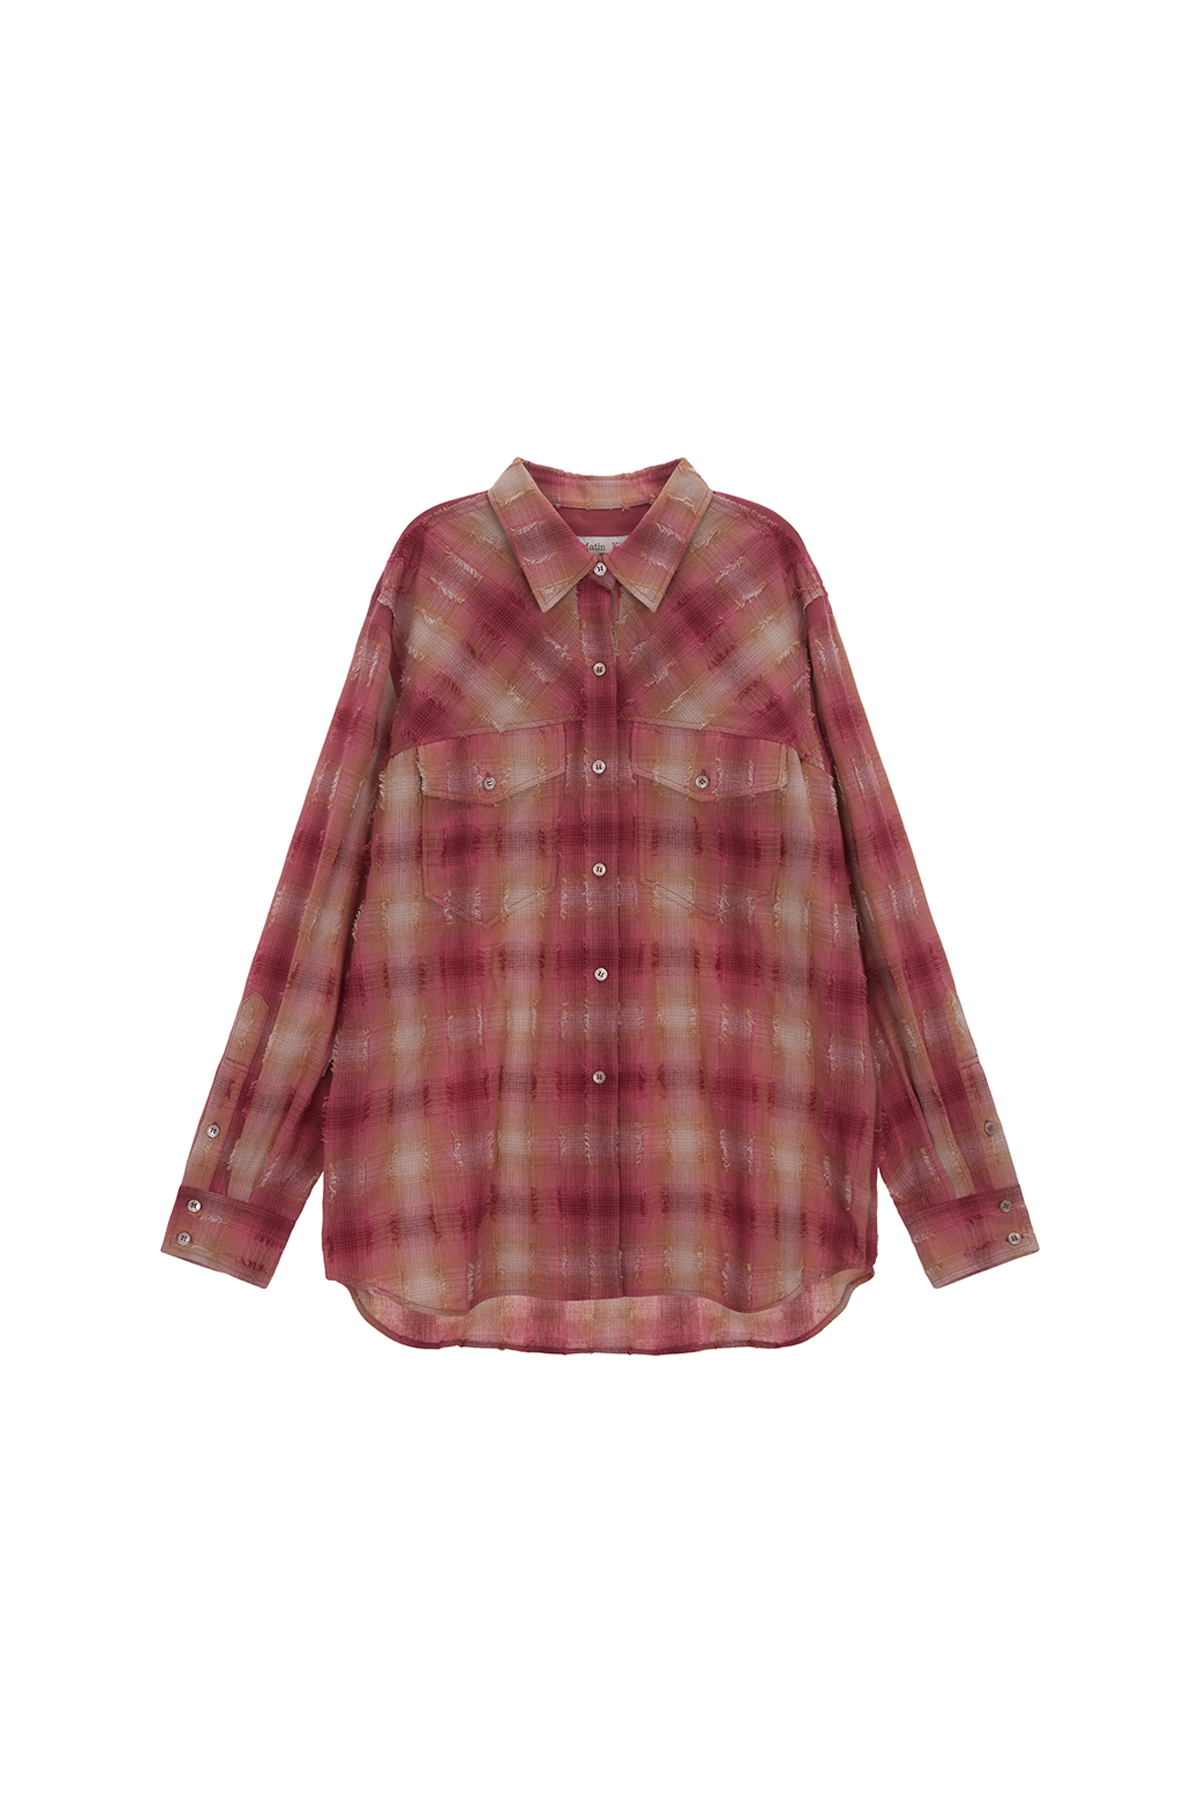 TWO POCKET CHECK SHIRT IN PINK